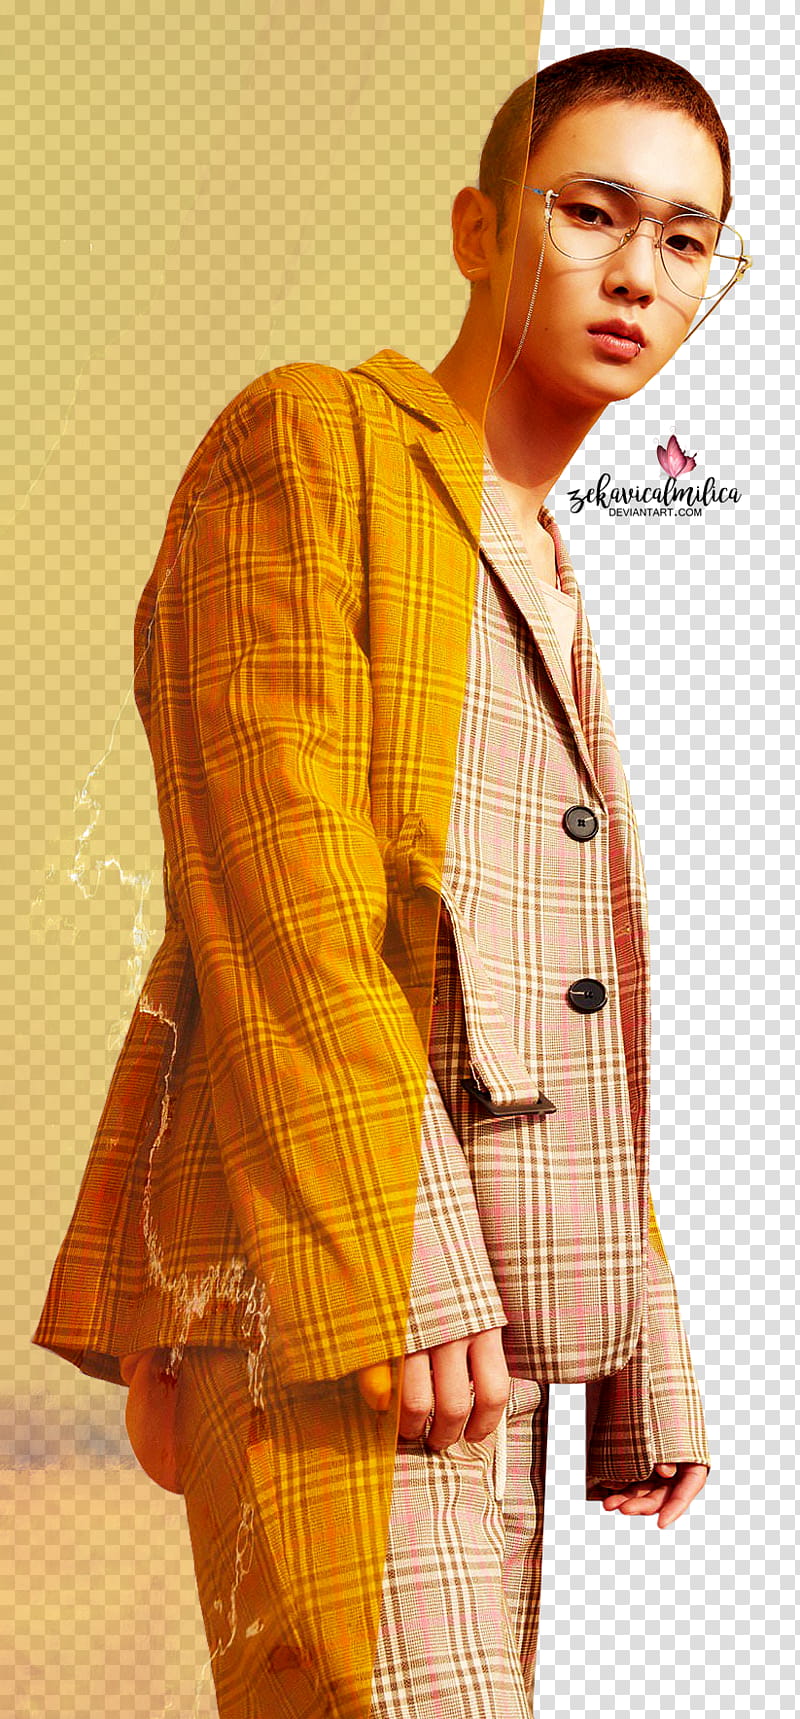 SHINee Key The Story Of Light transparent background PNG clipart